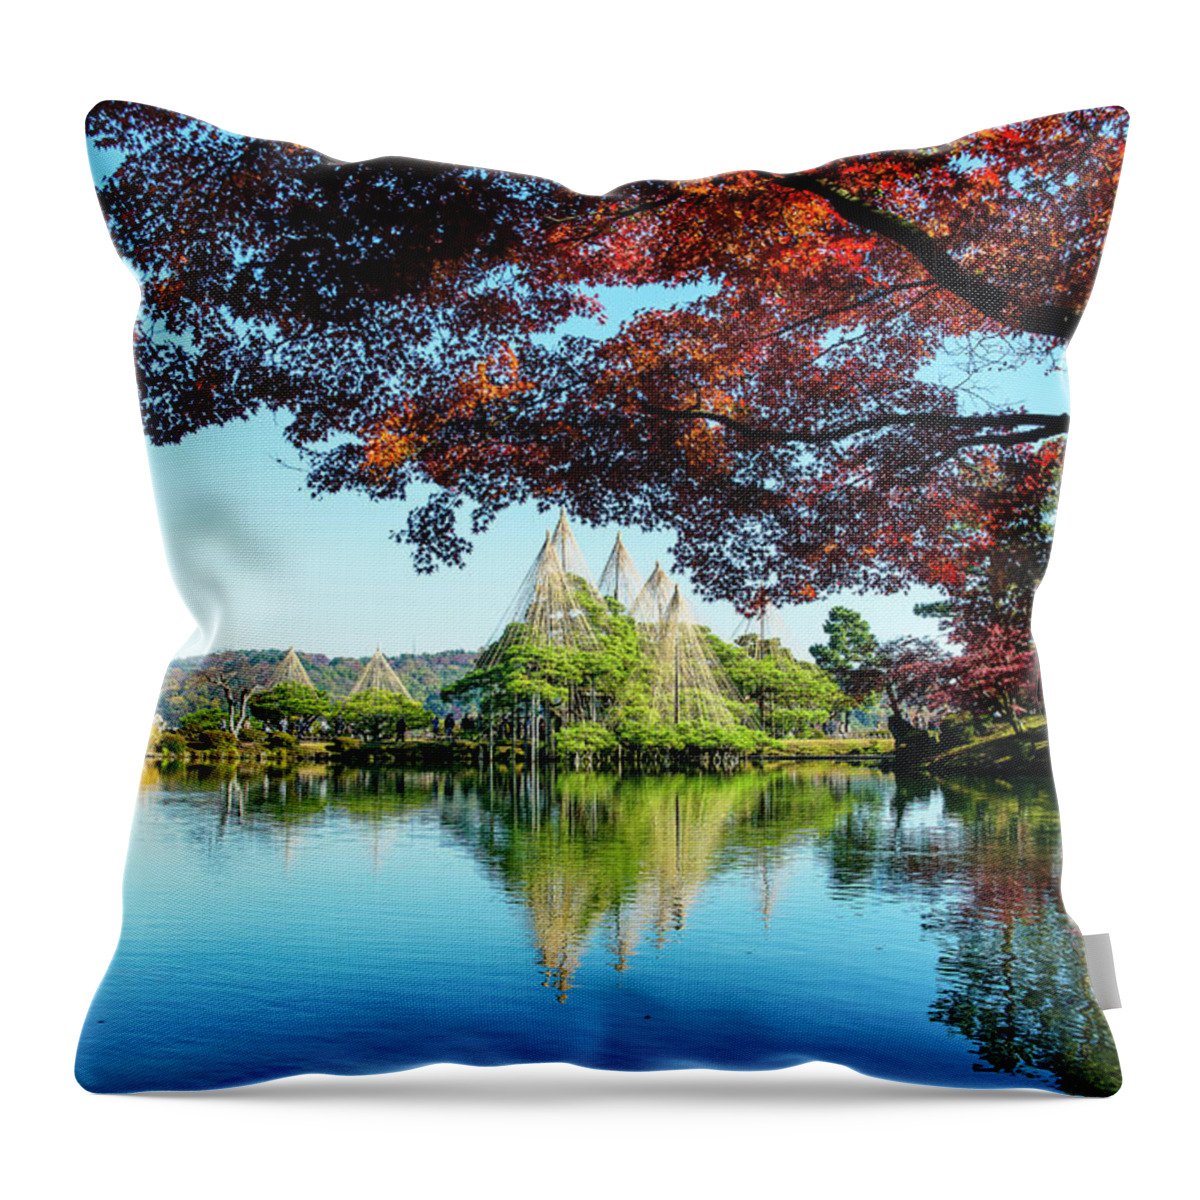 Landscape Throw Pillow featuring the photograph Snow Guard - Kenroku Park #2 by Hisao Mogi